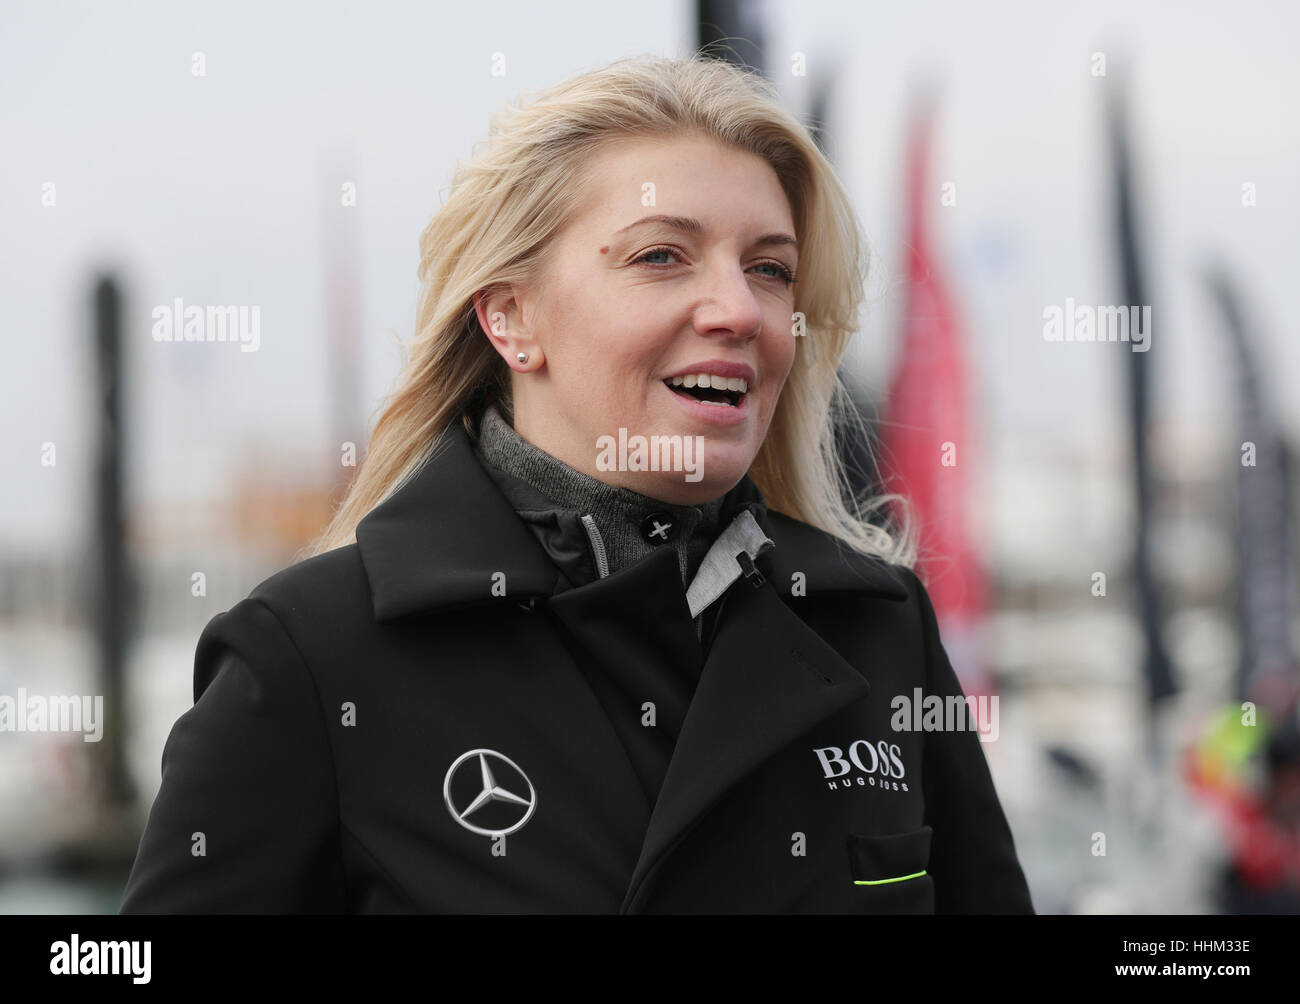 Kate Thomson, wife of British sailor Alex Thomson, during media interviews at Les Sables d'Olonne, western France, as she awaits her husband's finish in the Vendee Globe race. Stock Photo